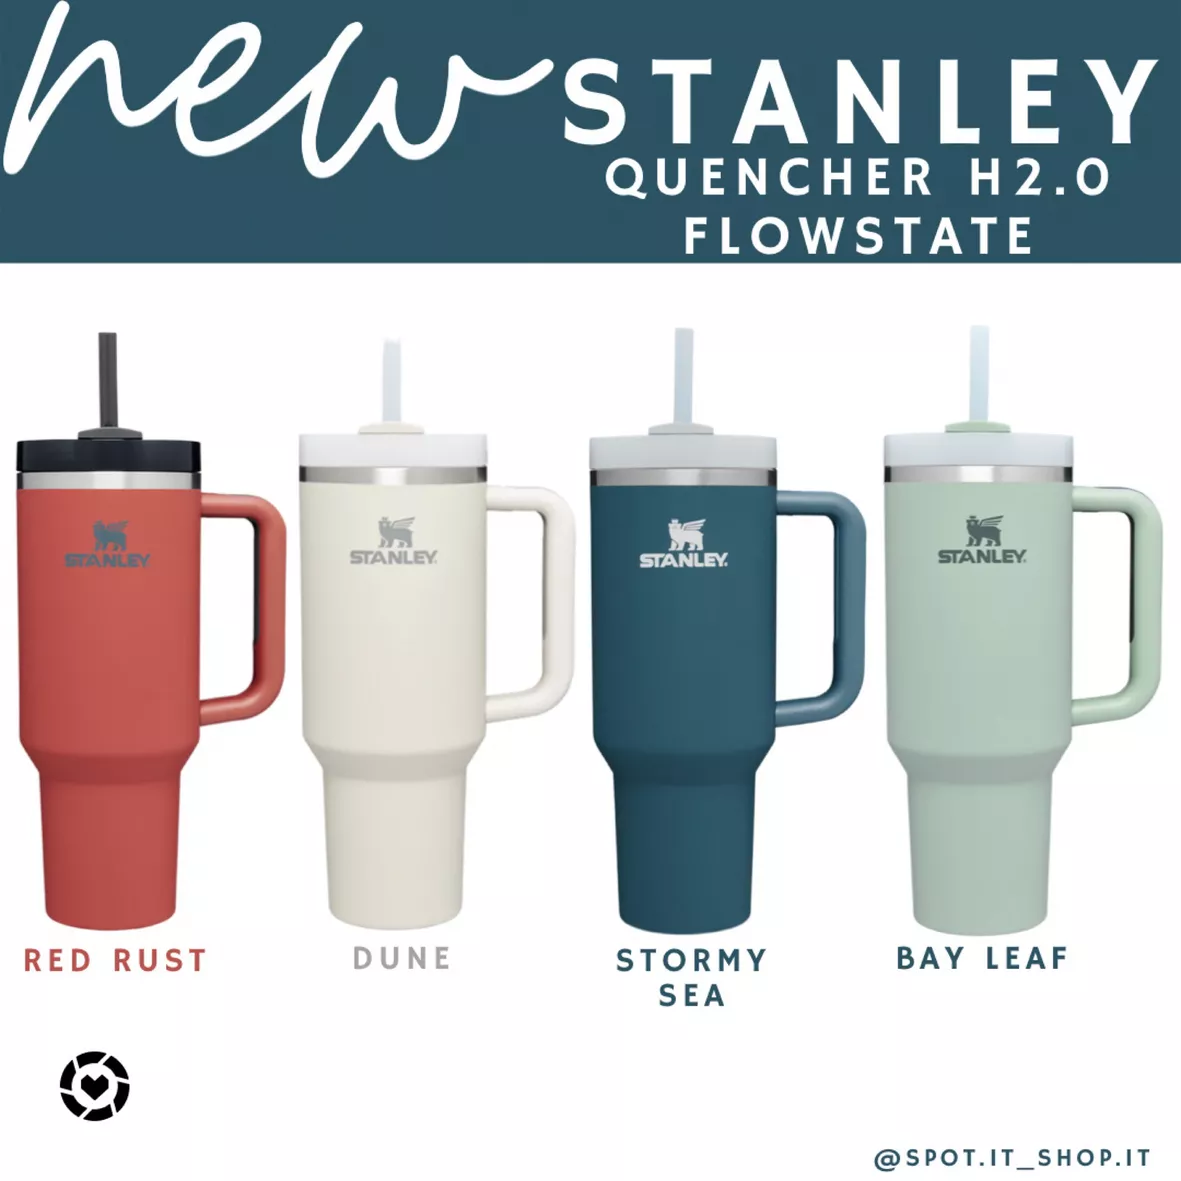 Stanley Adventure Quencher Flowstate 40oz H2.0 - RED RUST. NOT THE